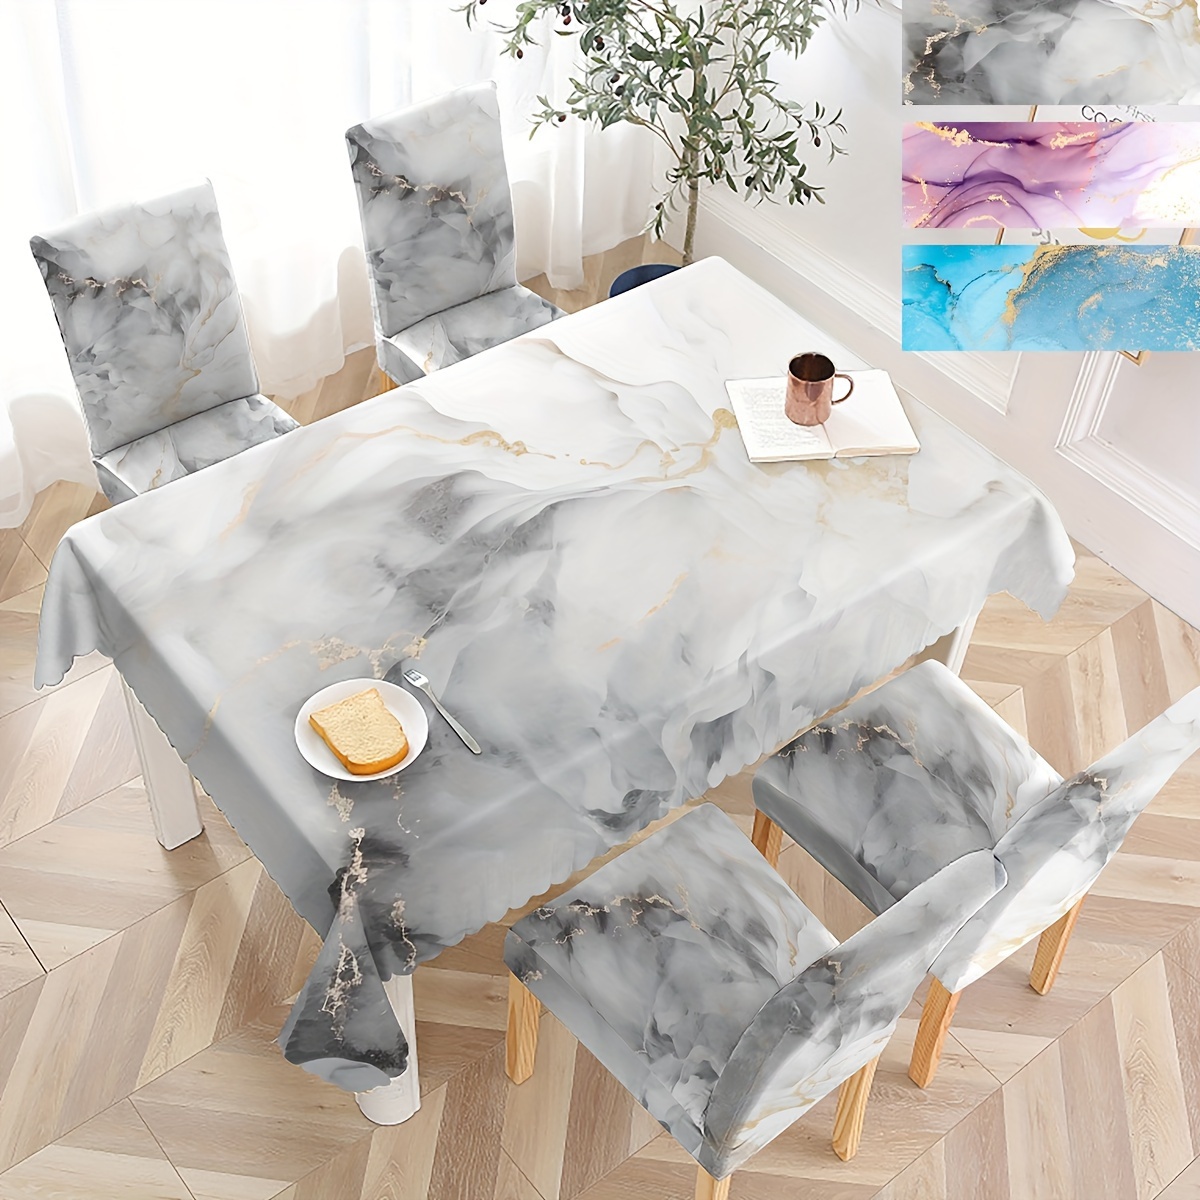 

（jit Product）4pc Printed Marble Pattern Chair Covers And 1pc Tablecloth Set - Easy To Care, For Dining, Party Decoration And Gifts